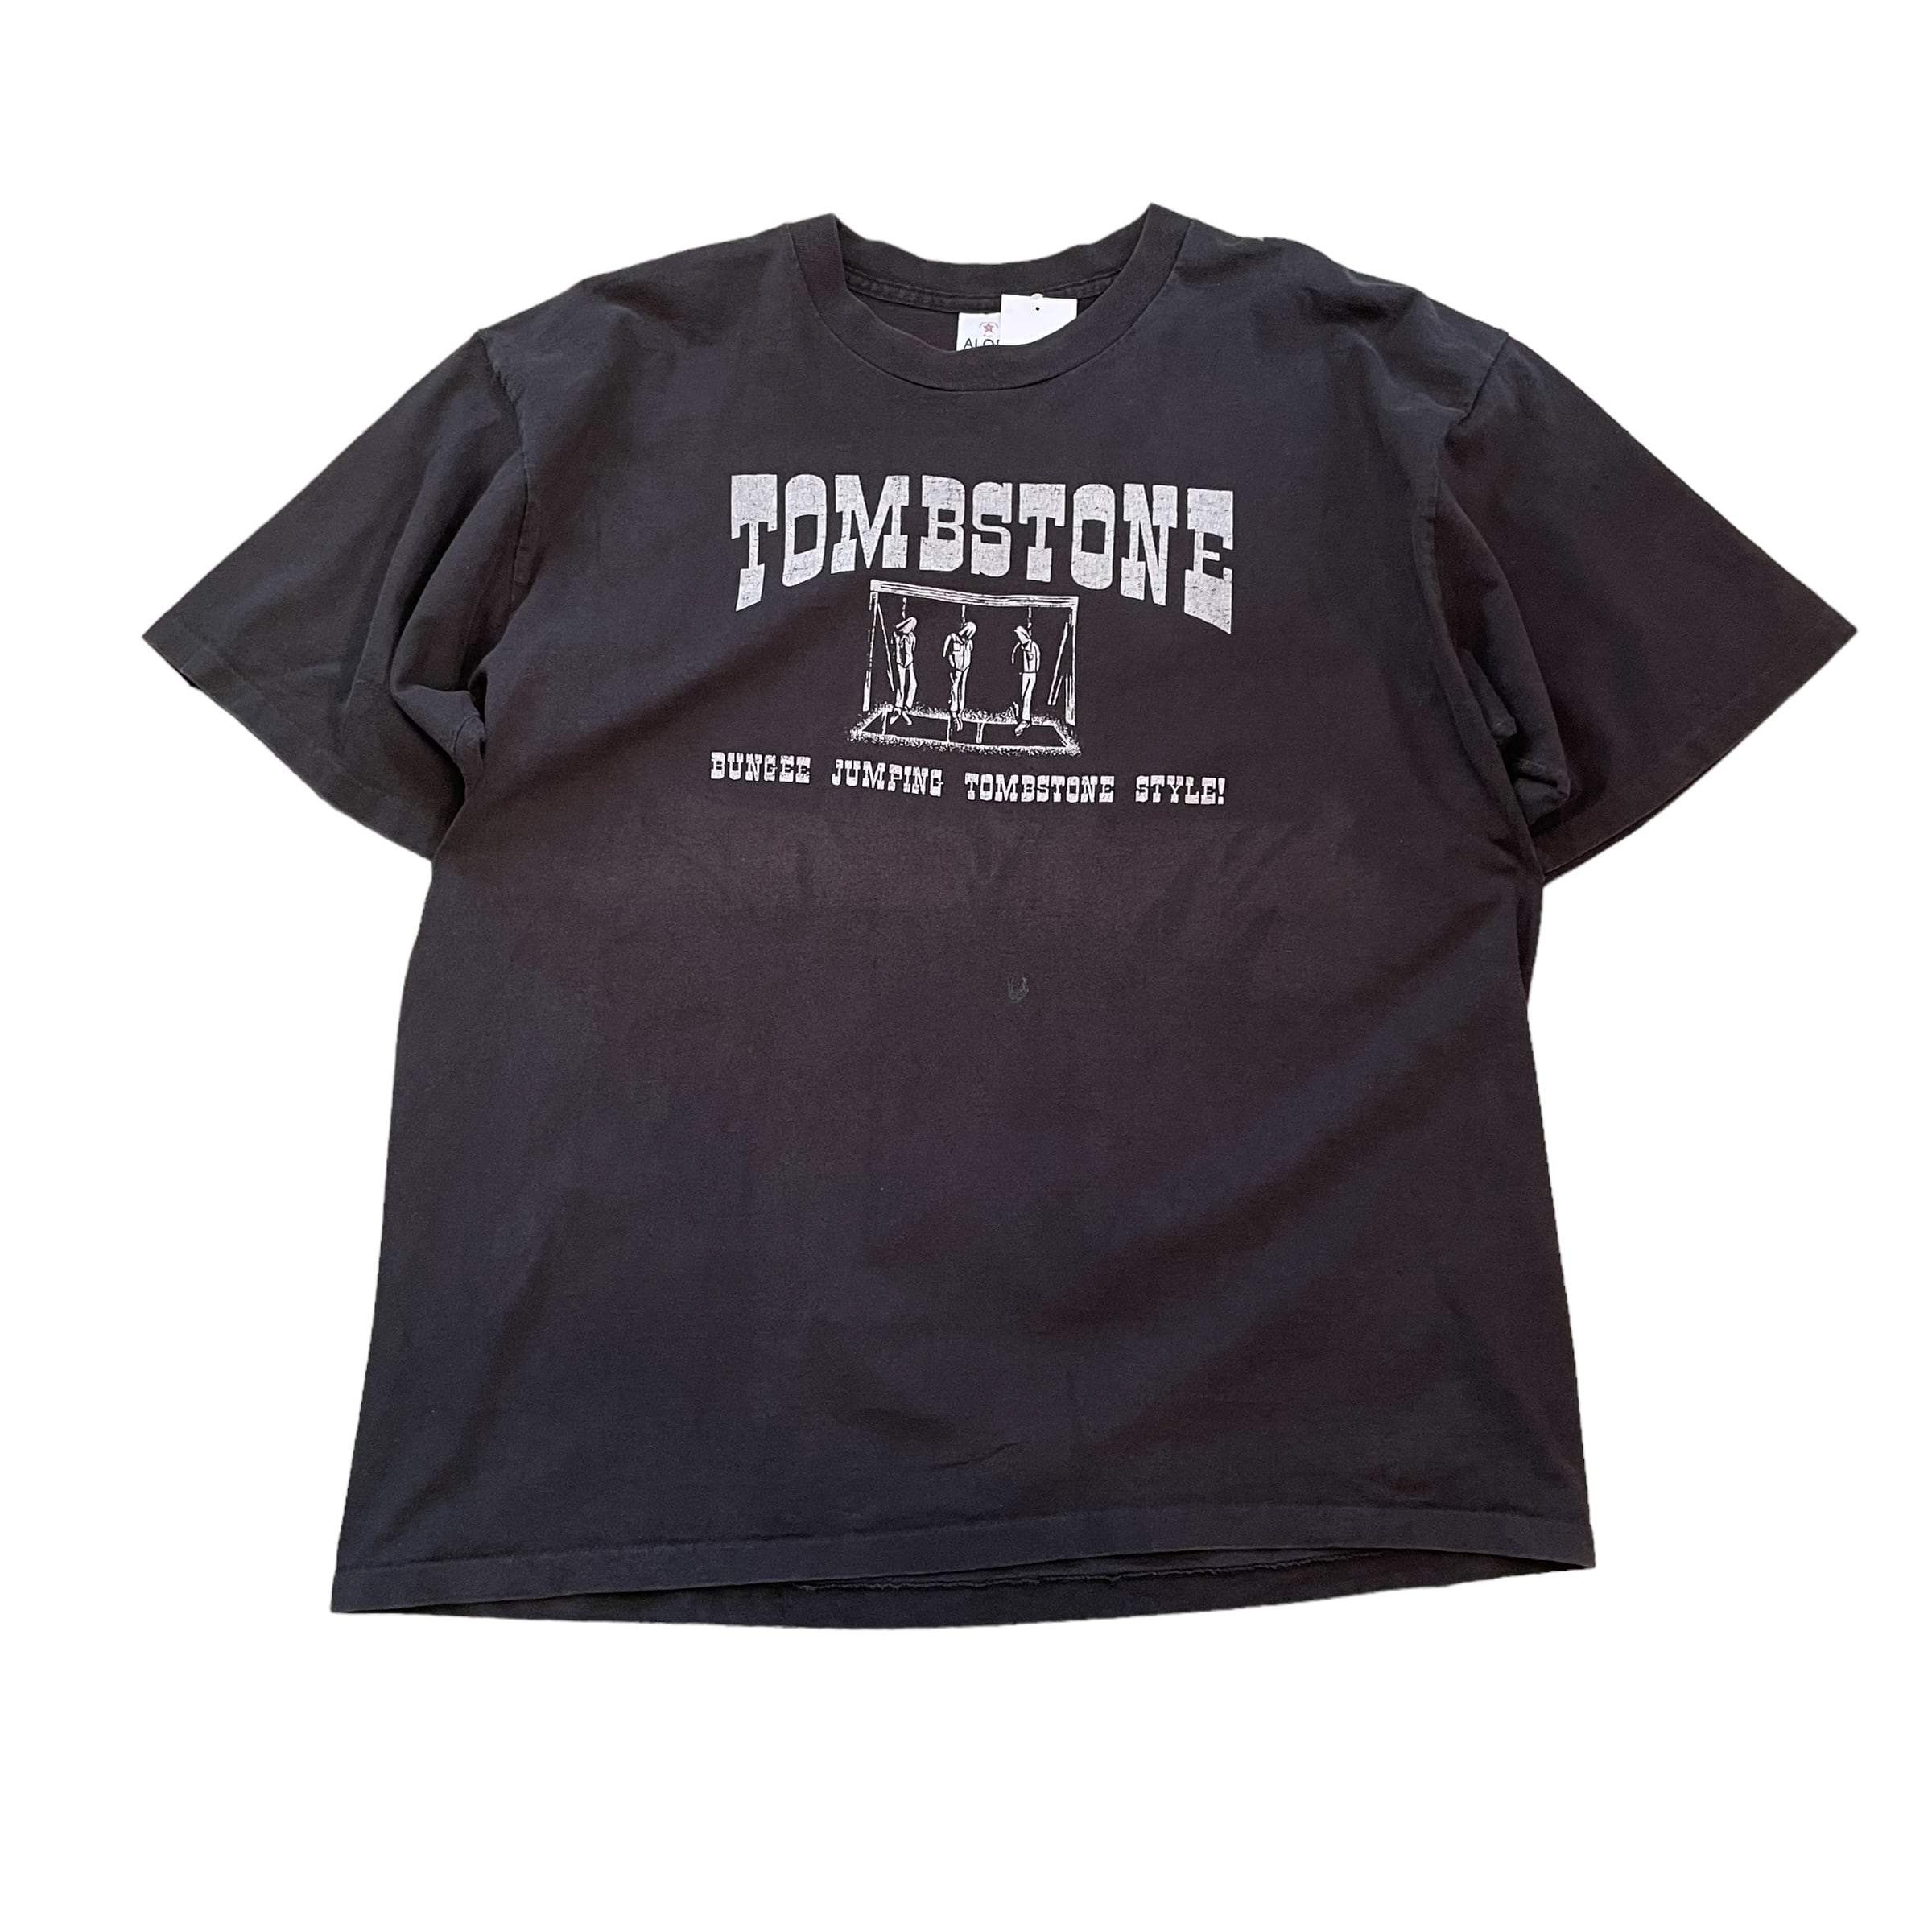 90s TOWER RECORDS T-shirt | What'z up